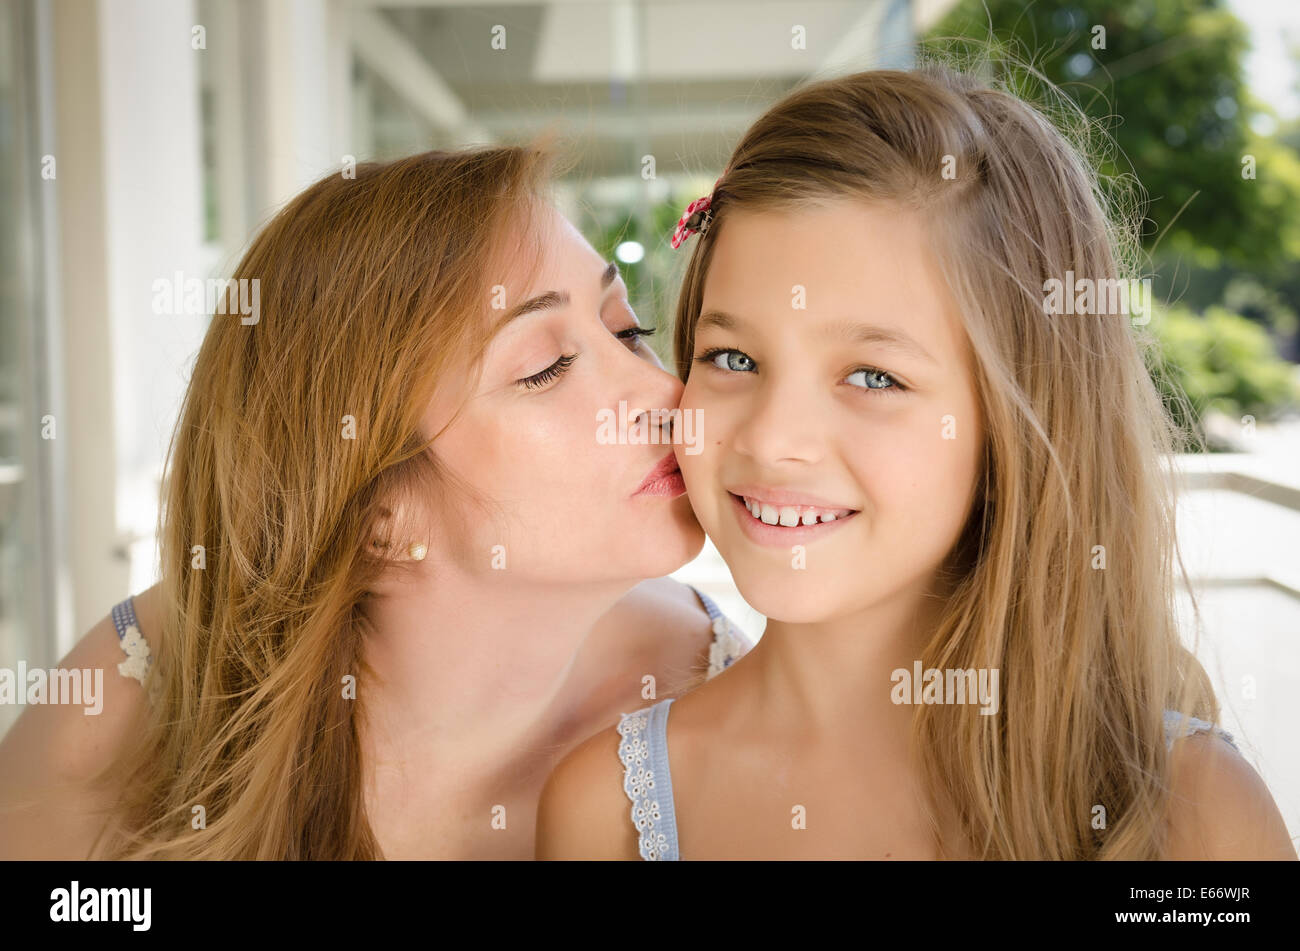 Mother kissing her daughter in the cheek. Taken in Buenos Aires, Argentina. Stock Photo